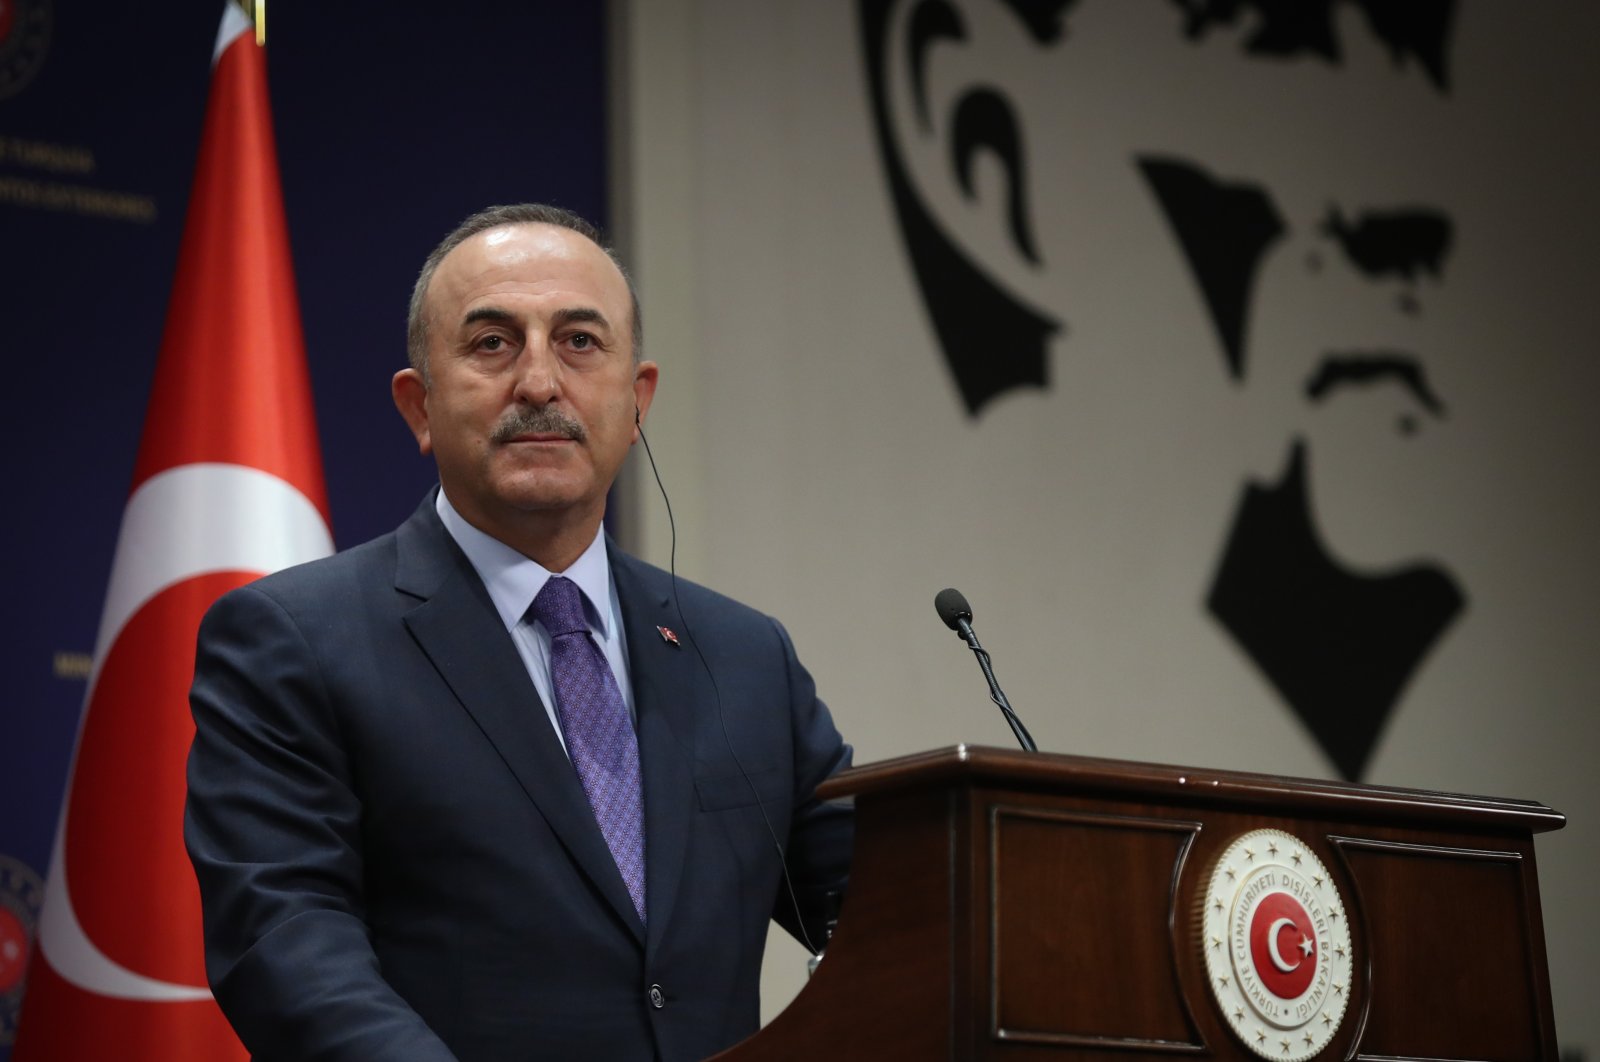 Foreign Minister Mevlüt Çavuşoğlu speaks at a joint news conference with his Palestinian counterpart in the capital Ankara, Turkey, May 7, 2021. (AA Photo)